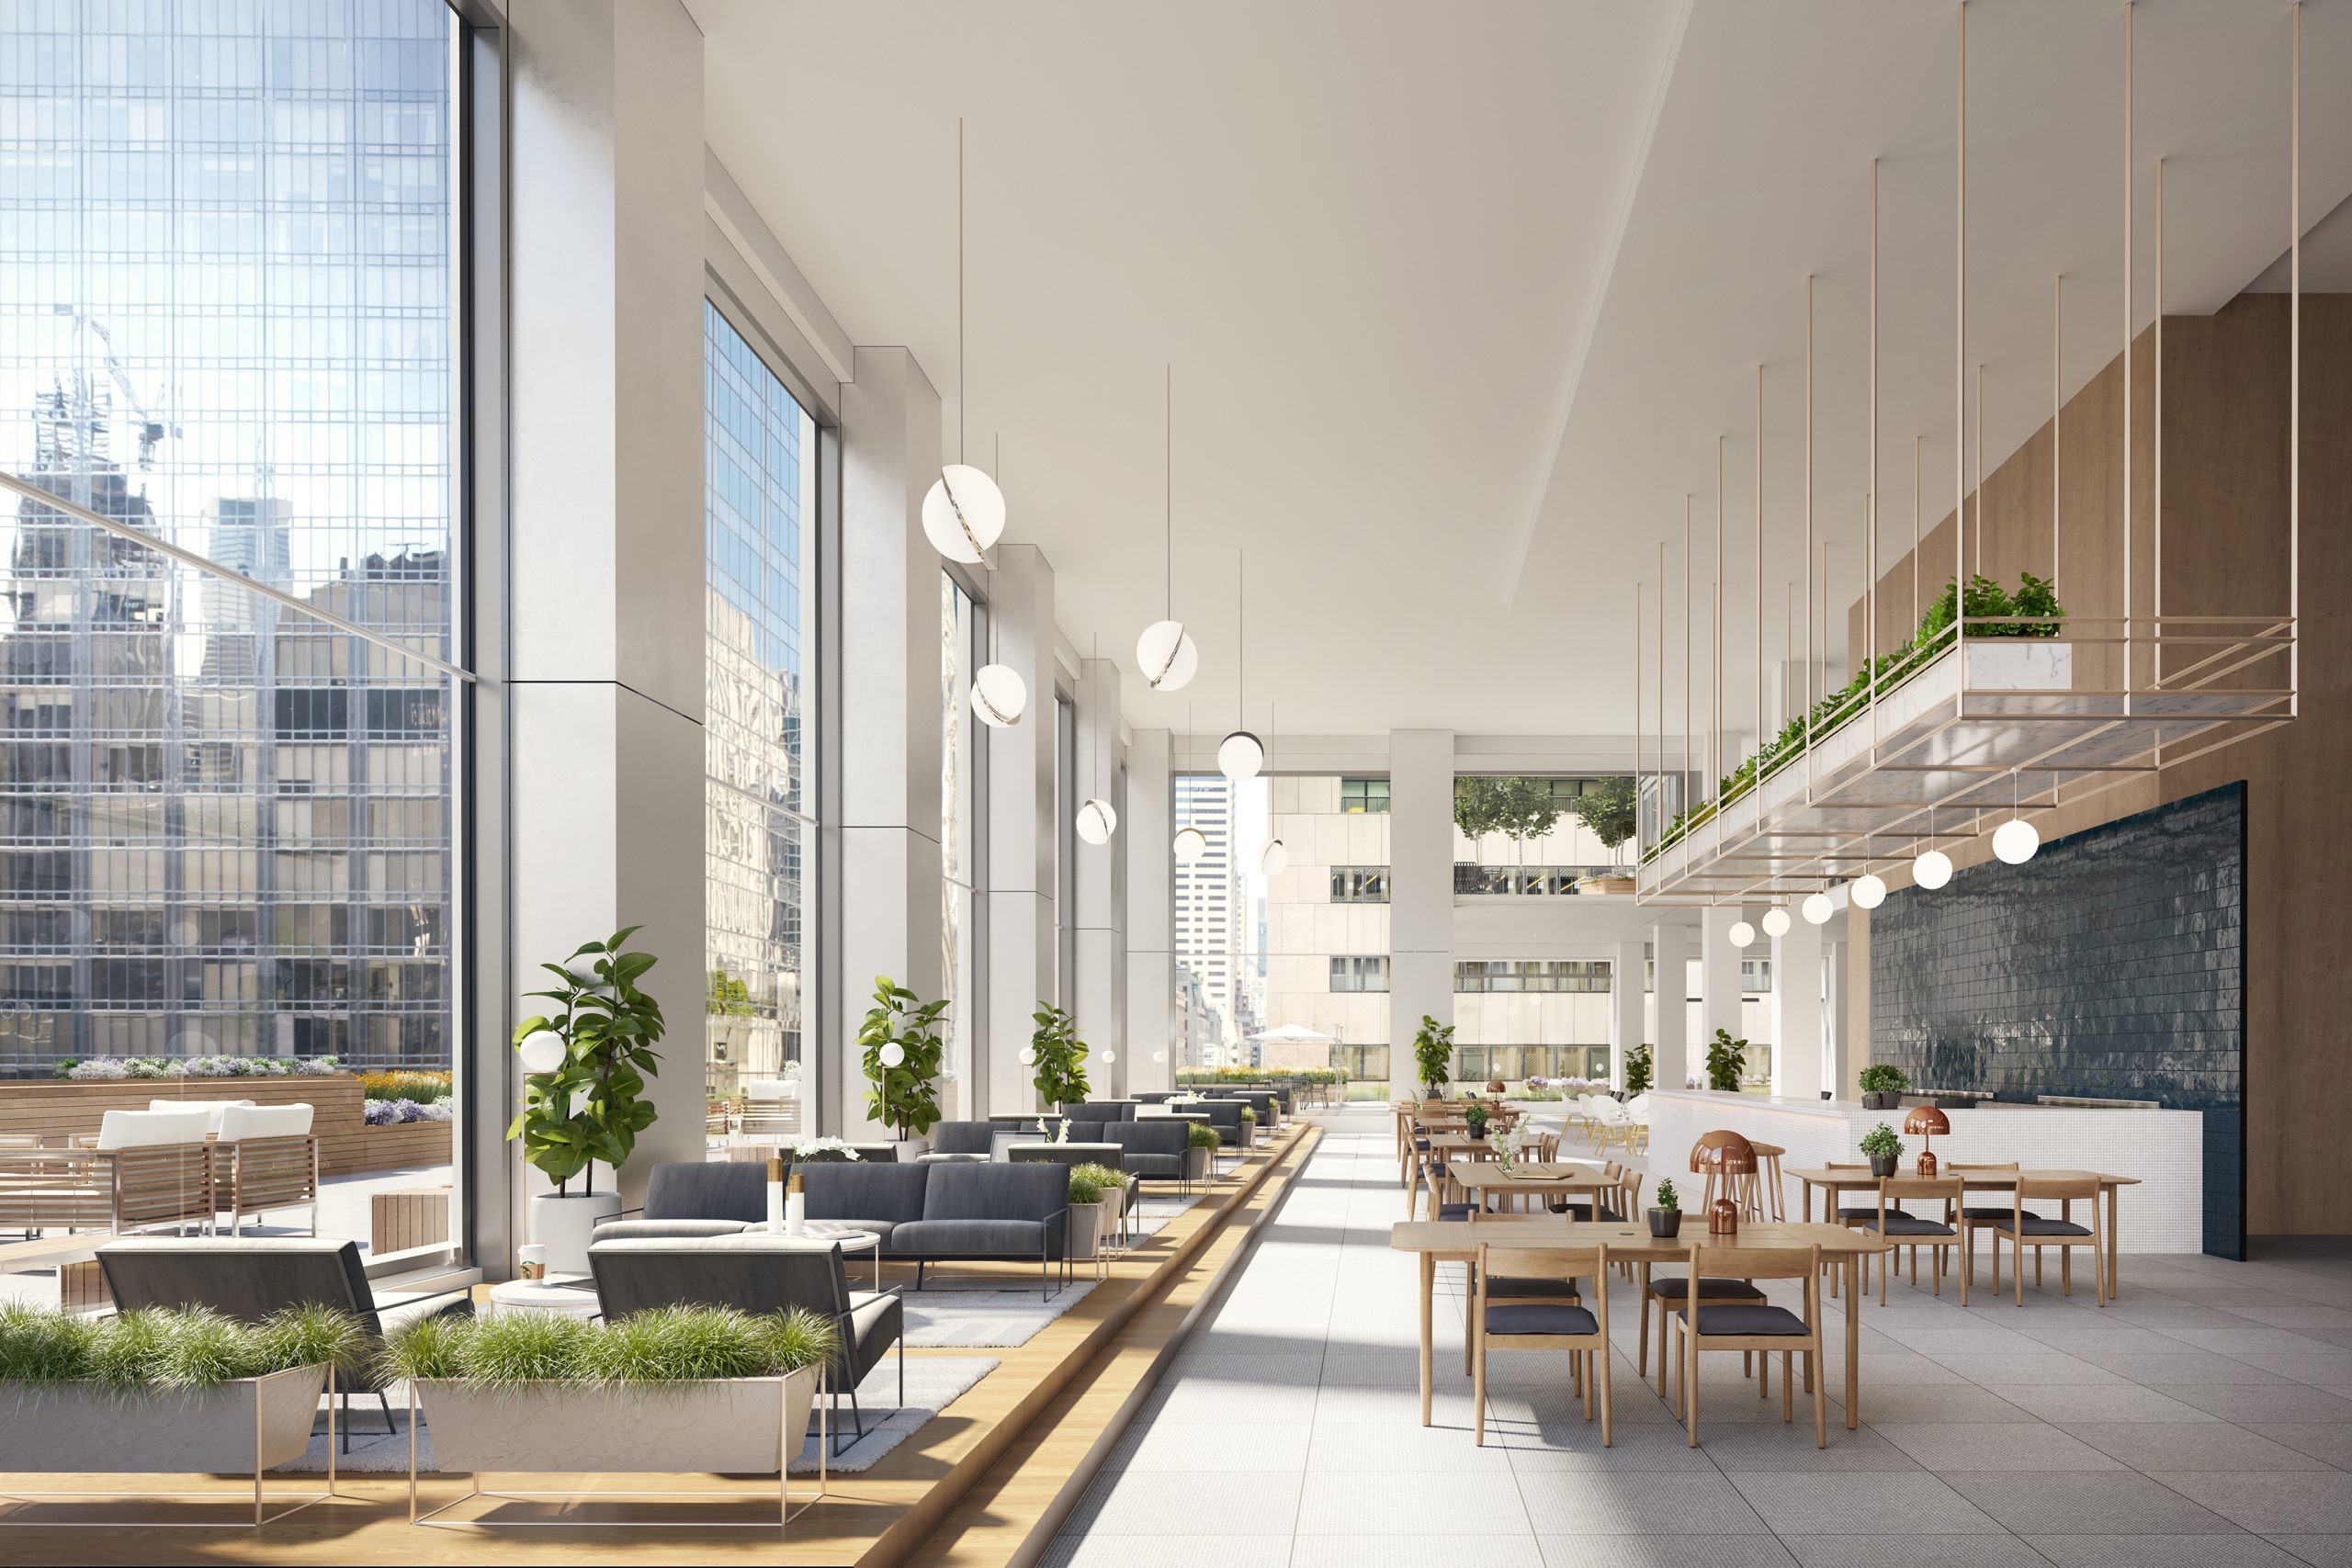 660 fifth avenue shared meeting spaces